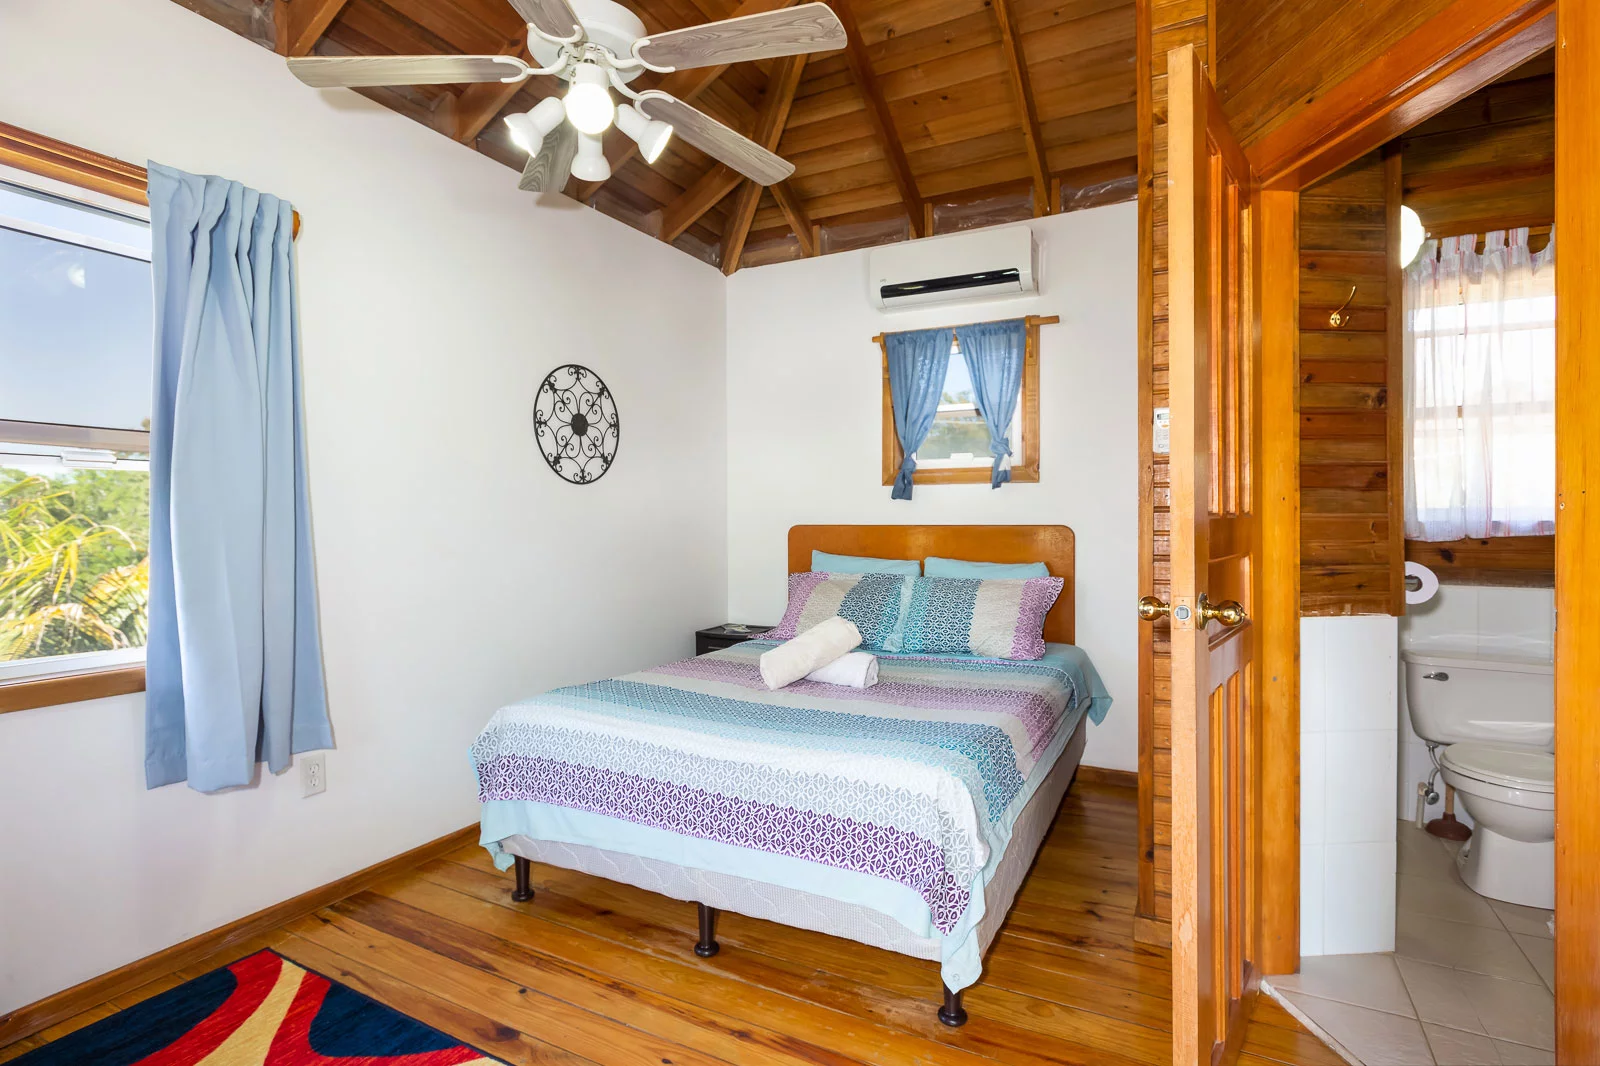 https://roatan-guavagrove.com/wp-content/uploads/2020/02/places-to-stay-in-roatan.jpg